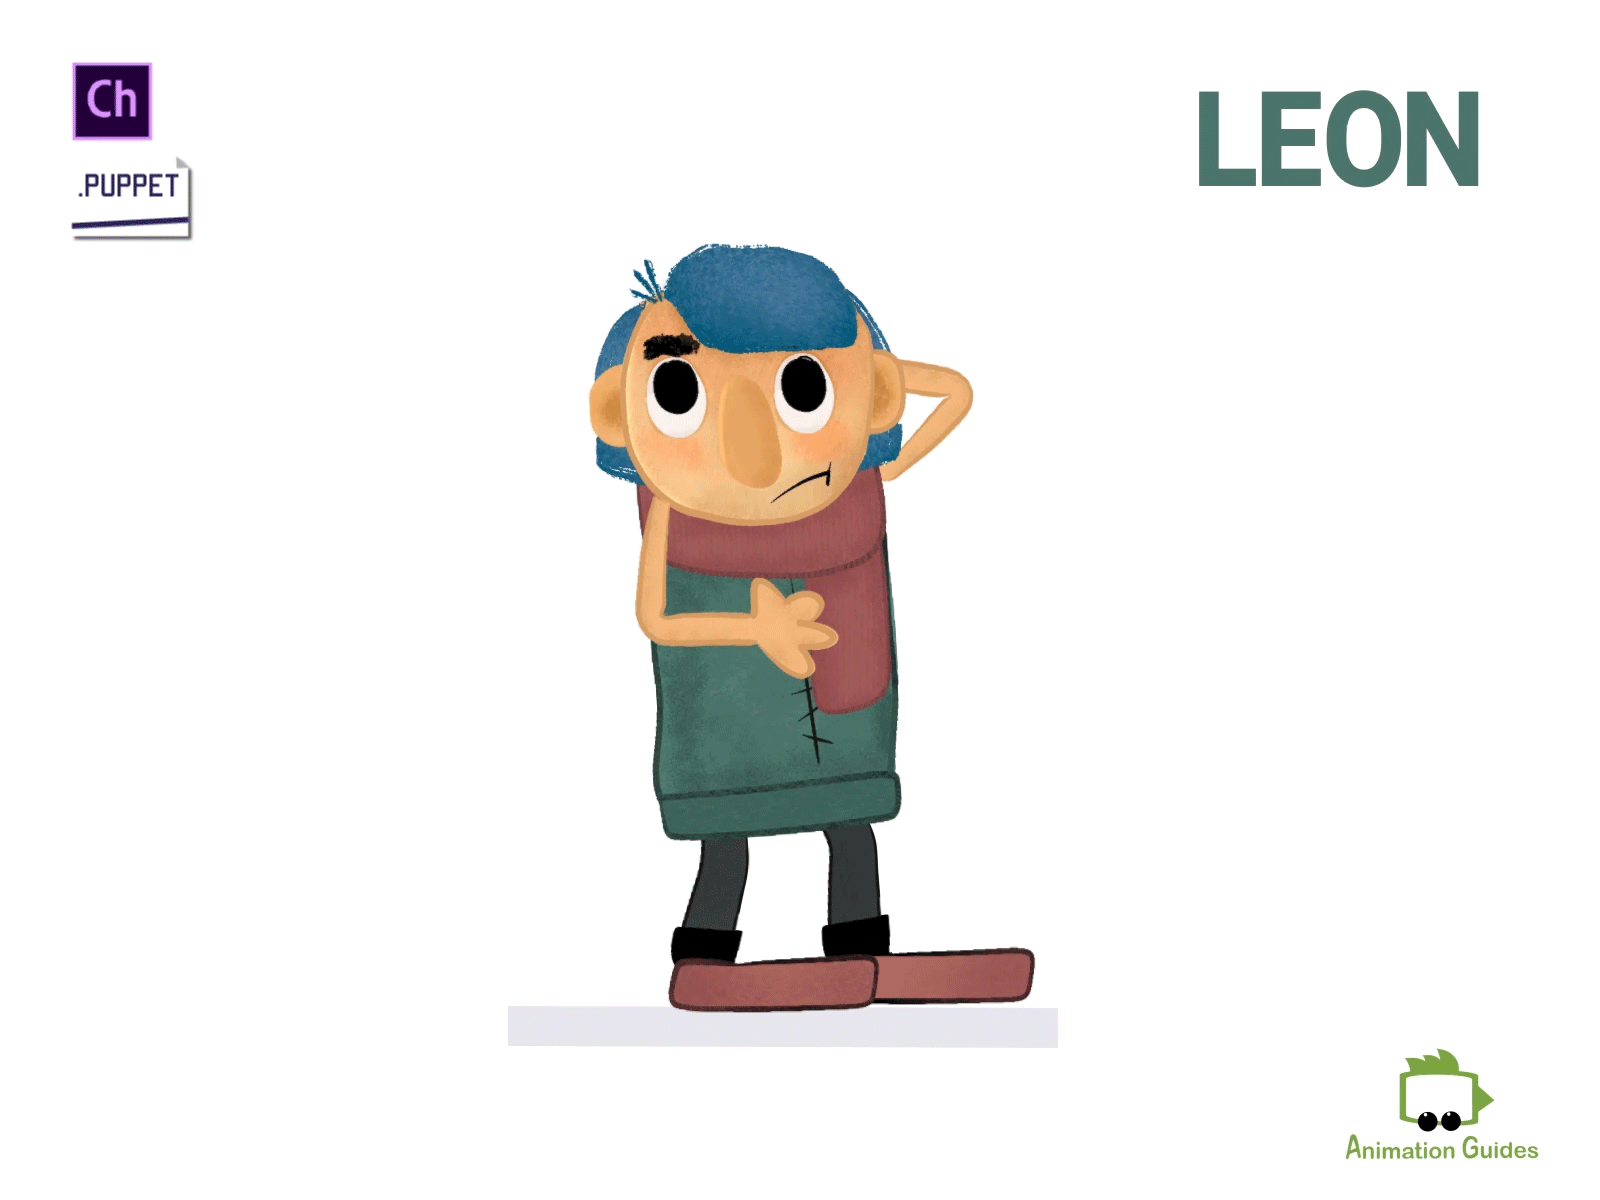 Leon is Hungry